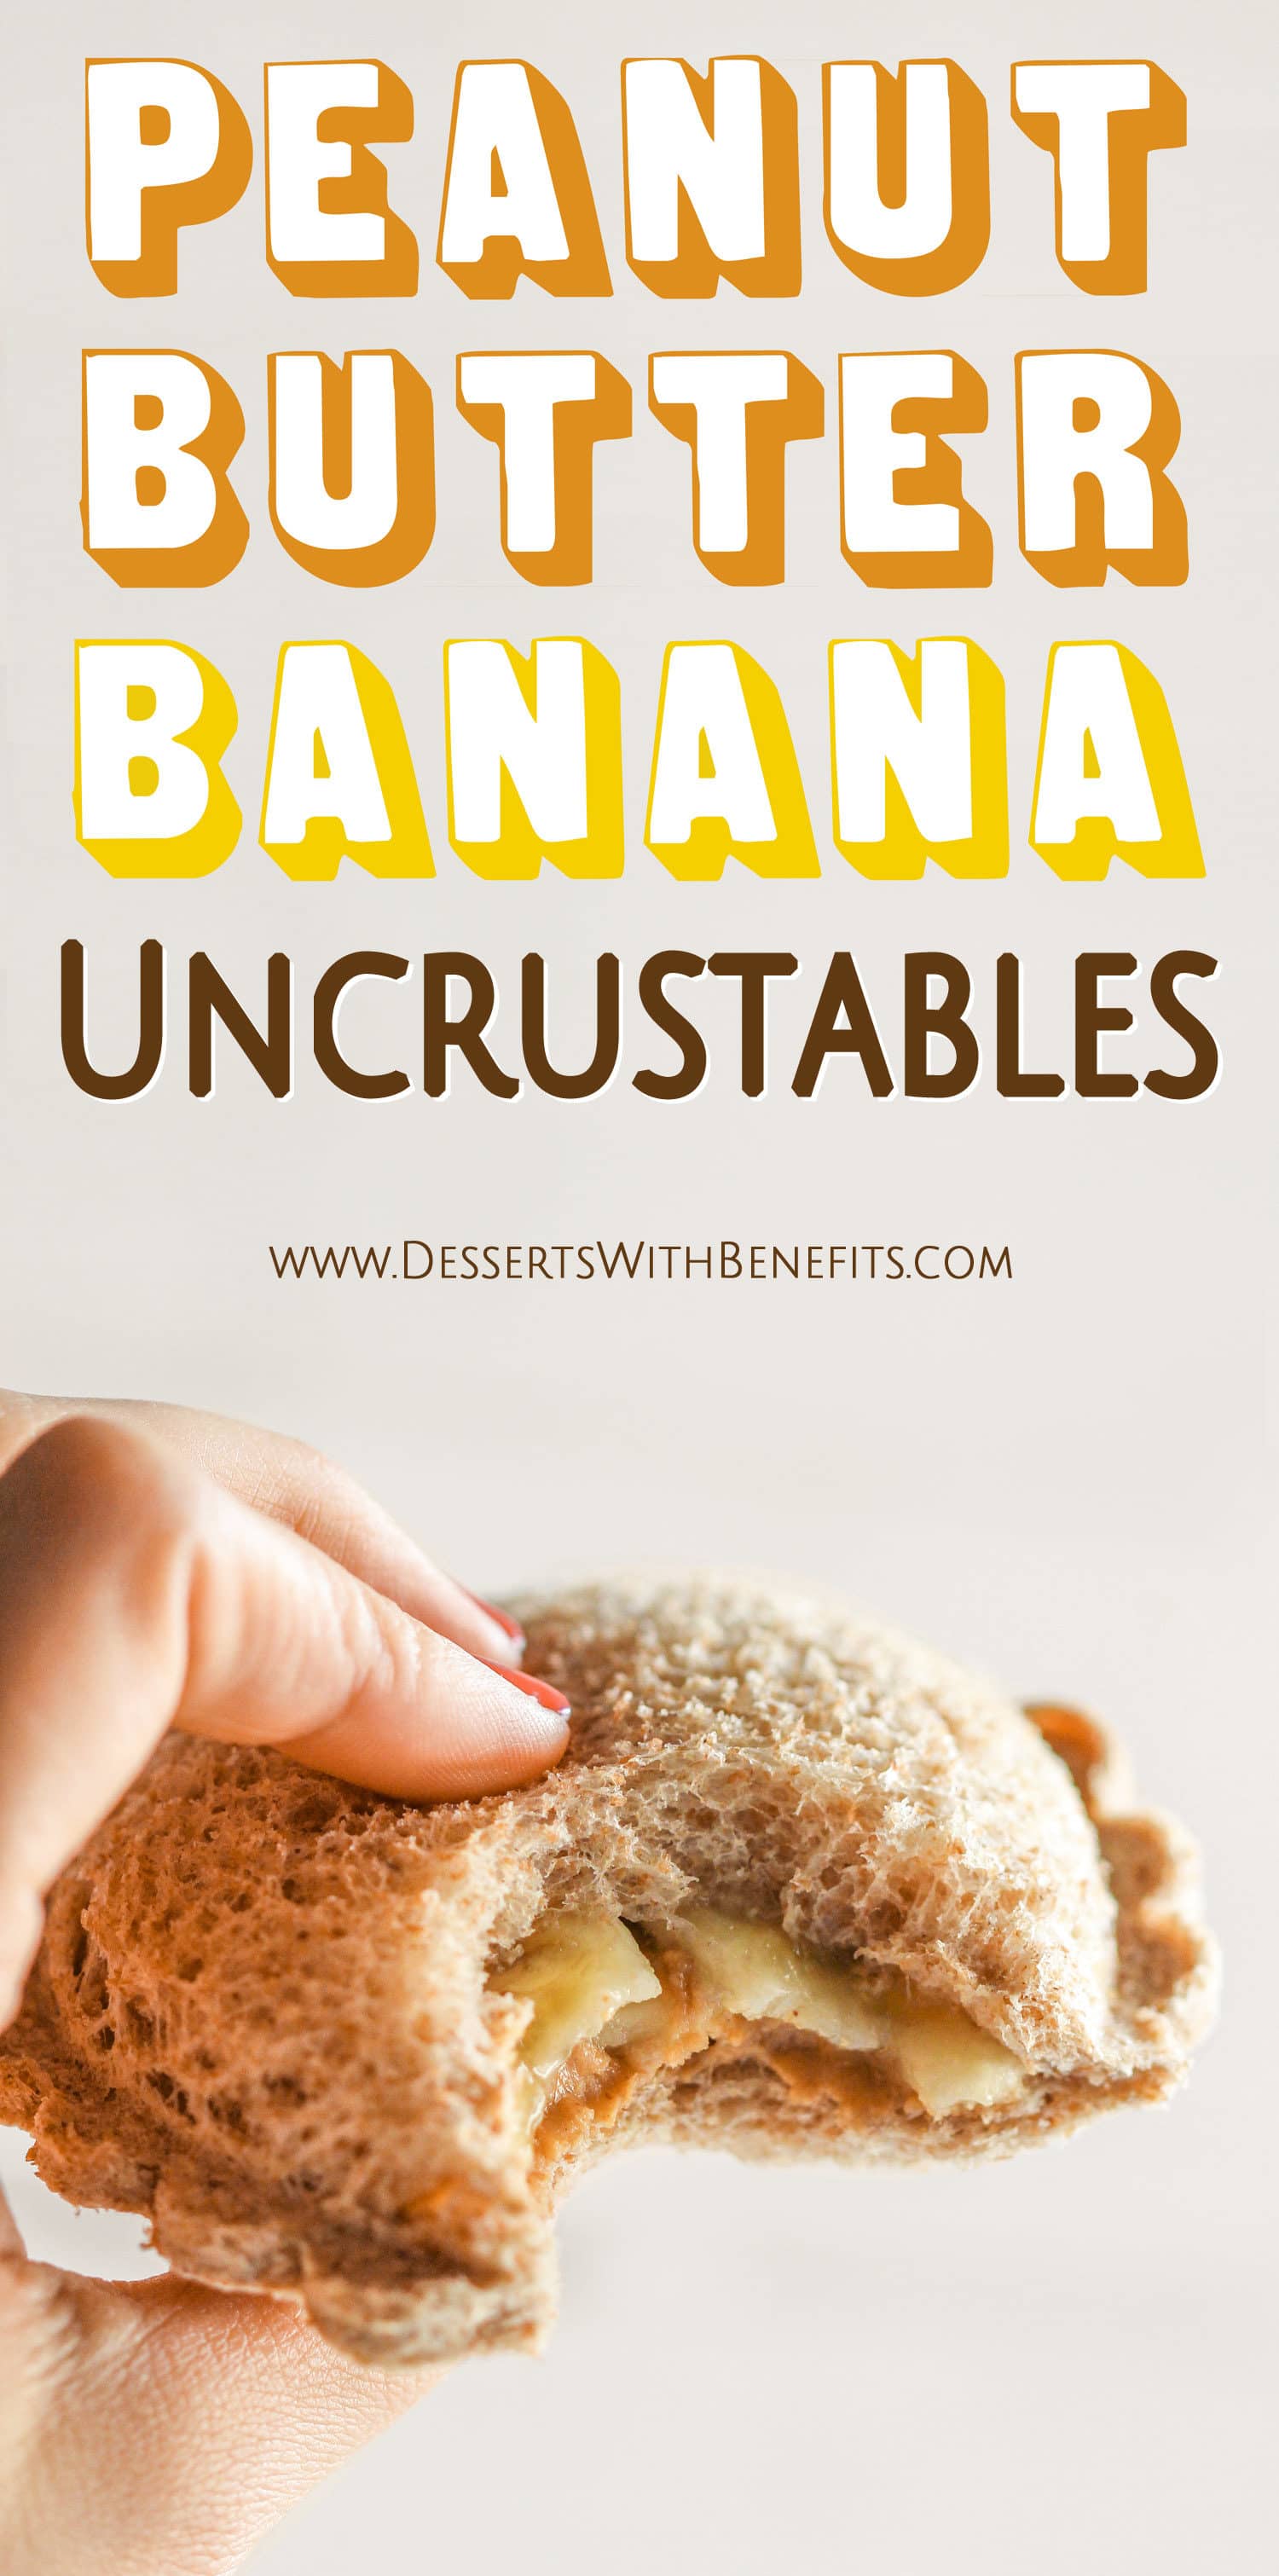 Uncrustables have been made BETTER (and healthier while we're at it)! These Healthy Homemade Peanut Butter Banana Uncrustables are all natural and whole grain with no sugar added. Far better than the original! Healthy Dessert Recipes with low calorie, low fat, high protein, gluten free, and vegan options at the Desserts With Benefits Blog (www.DessertsWithBenefits.com)